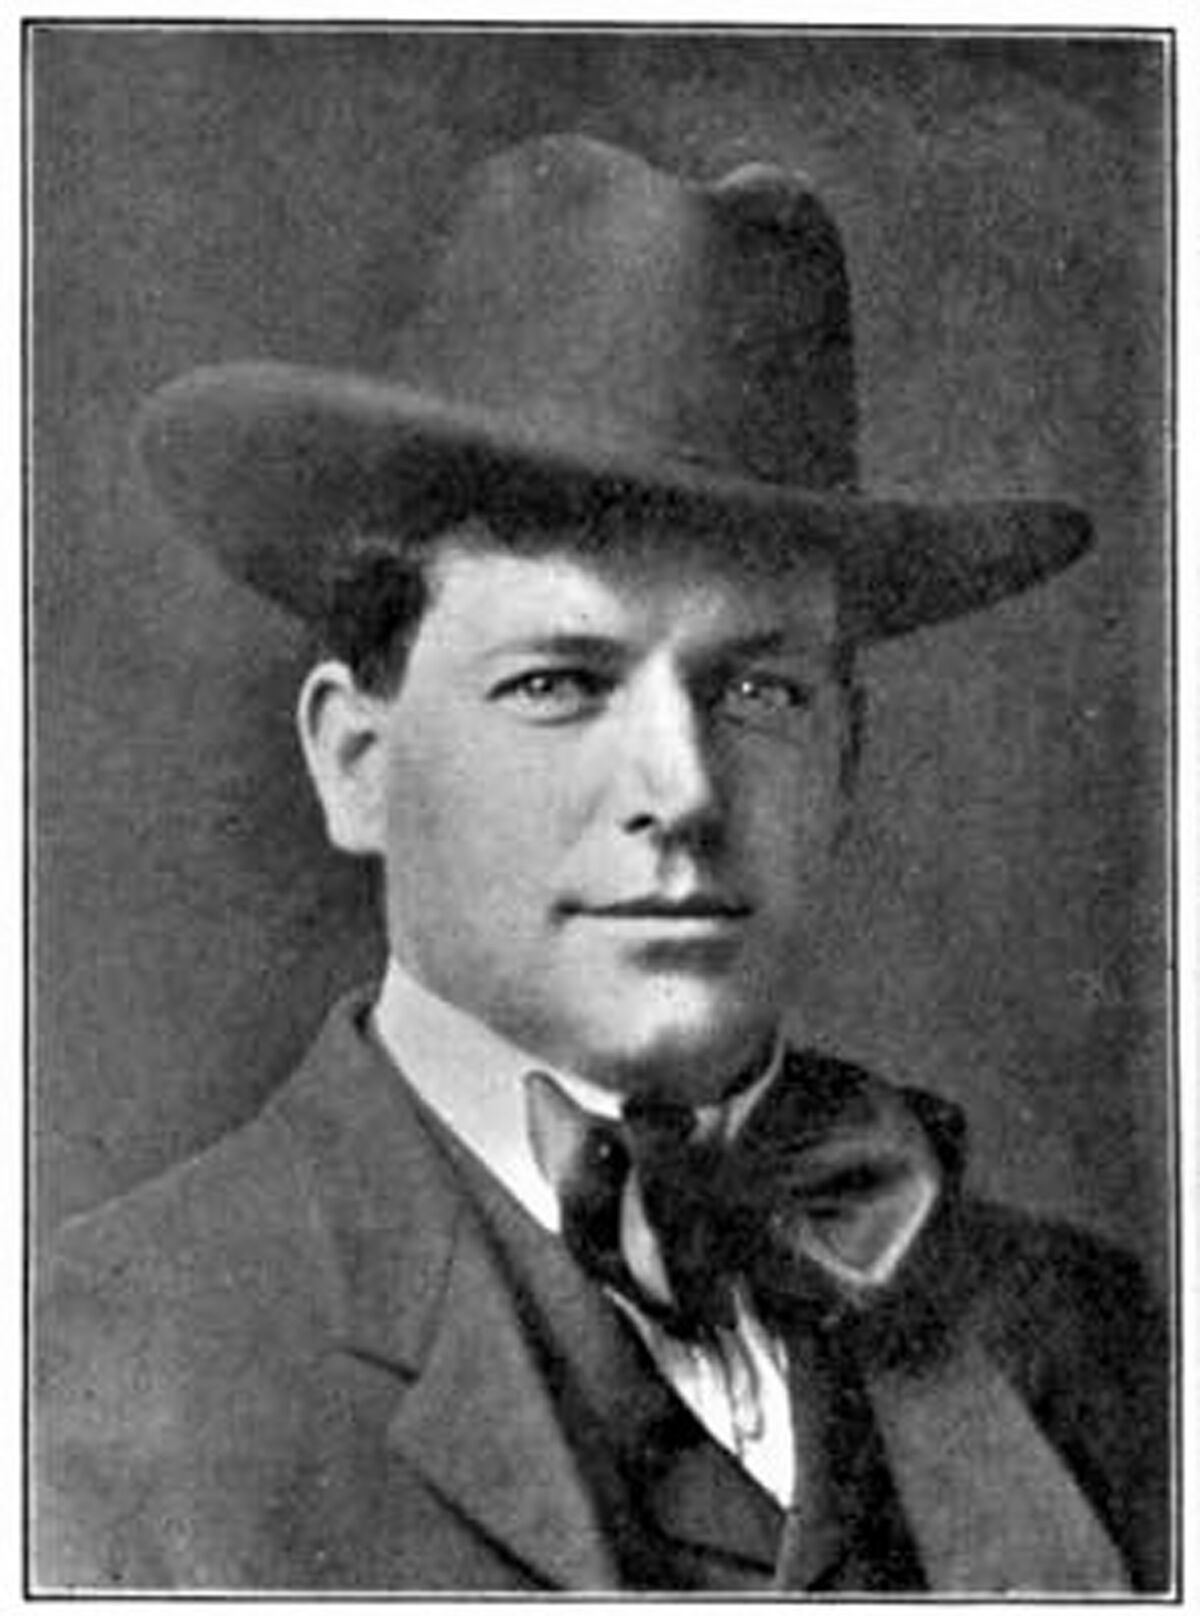 D.C. “Charlie” Collier sporting his “five-gallon hat” and “Windsor tie.”